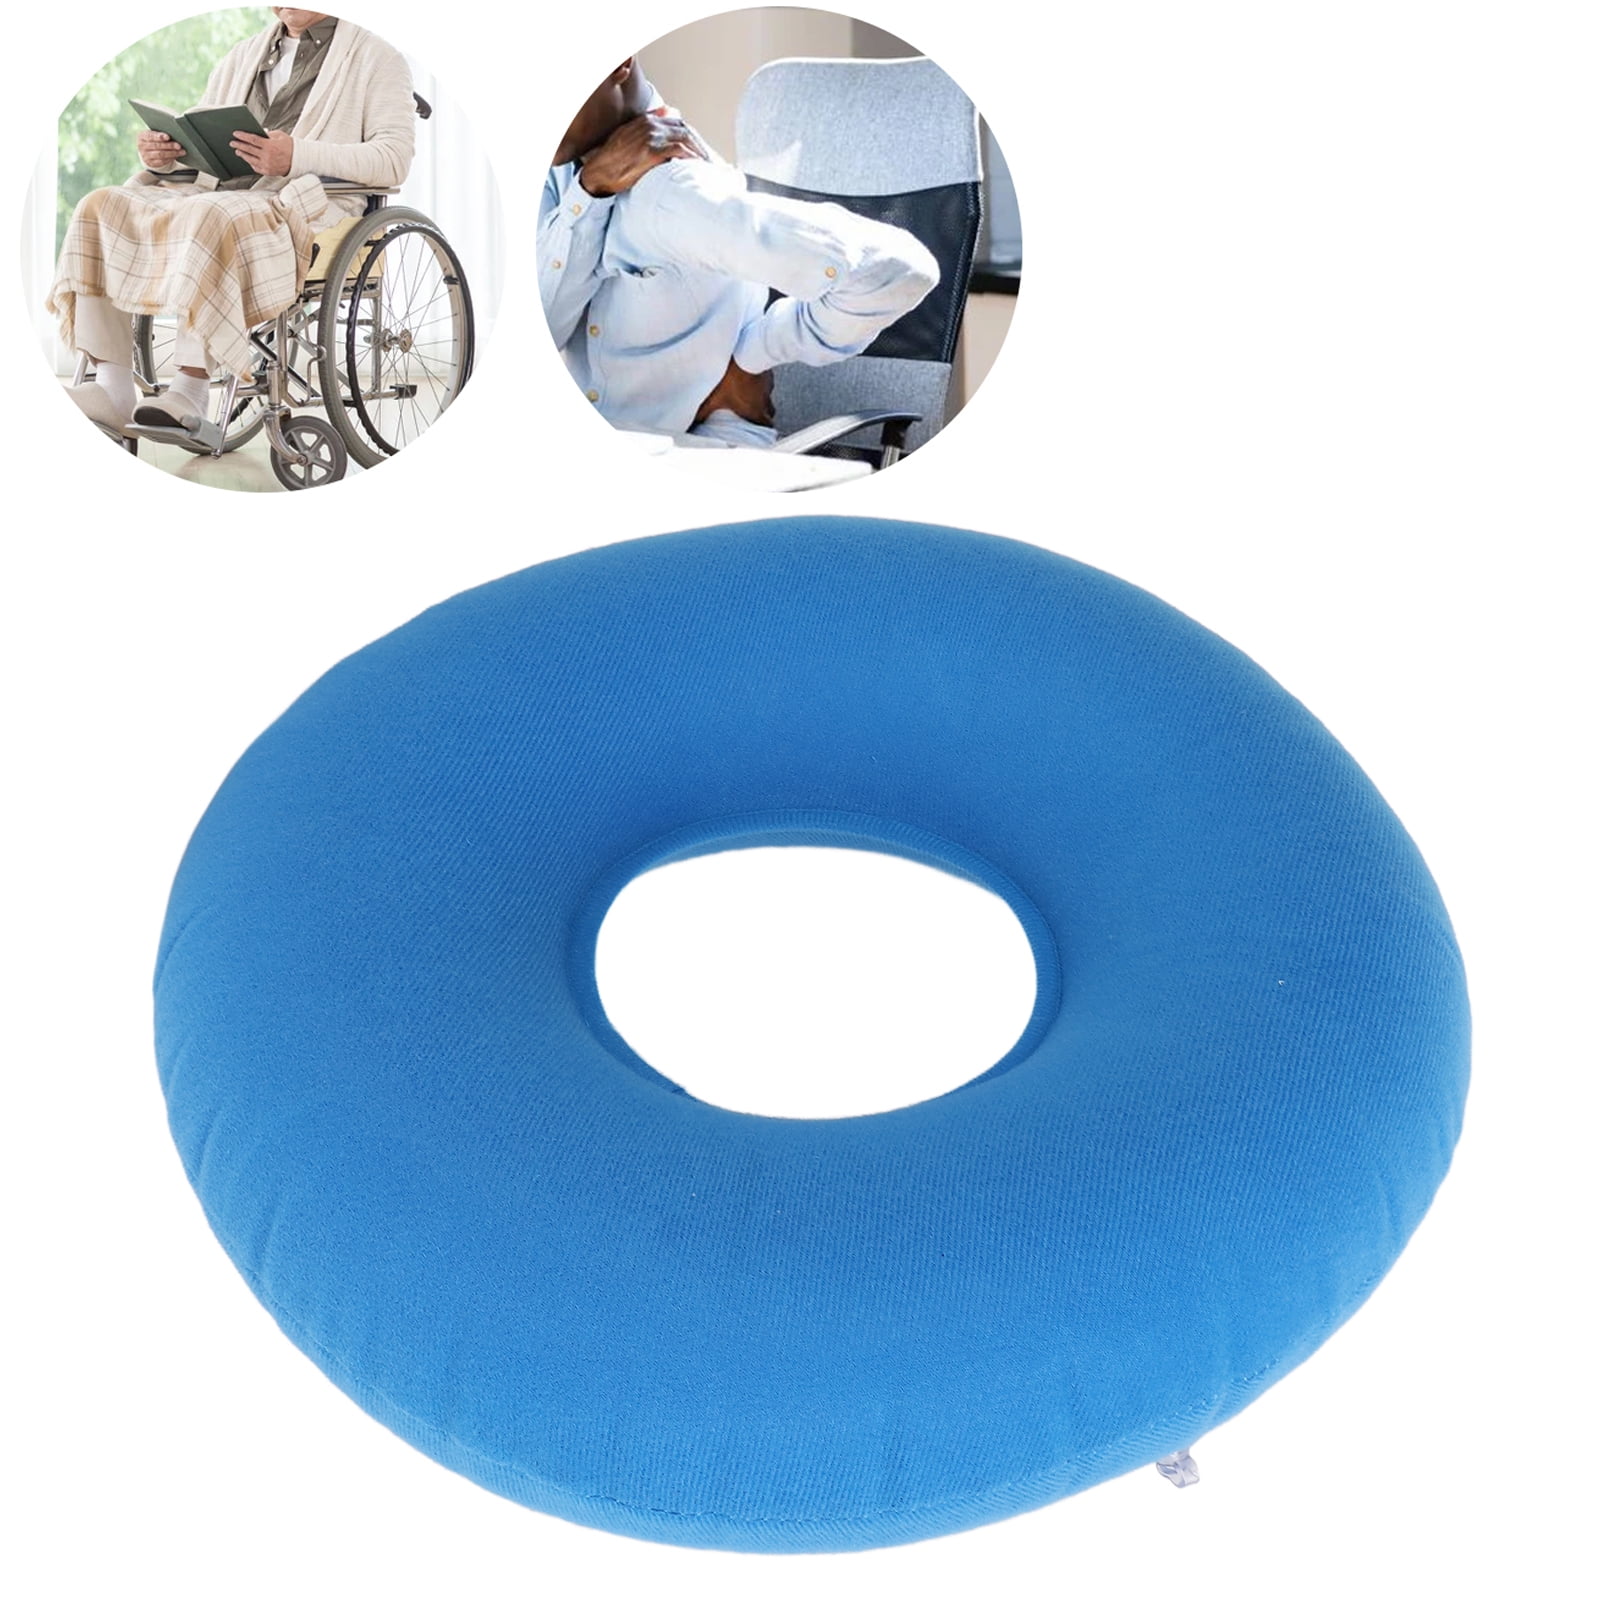 Yinhing Inflatable Elder Donut Cushion, Breathable Anti Bedsore Mat for  Office People Students, Inflatable Ring Shape Cushion, Anti Bedsore Pillow